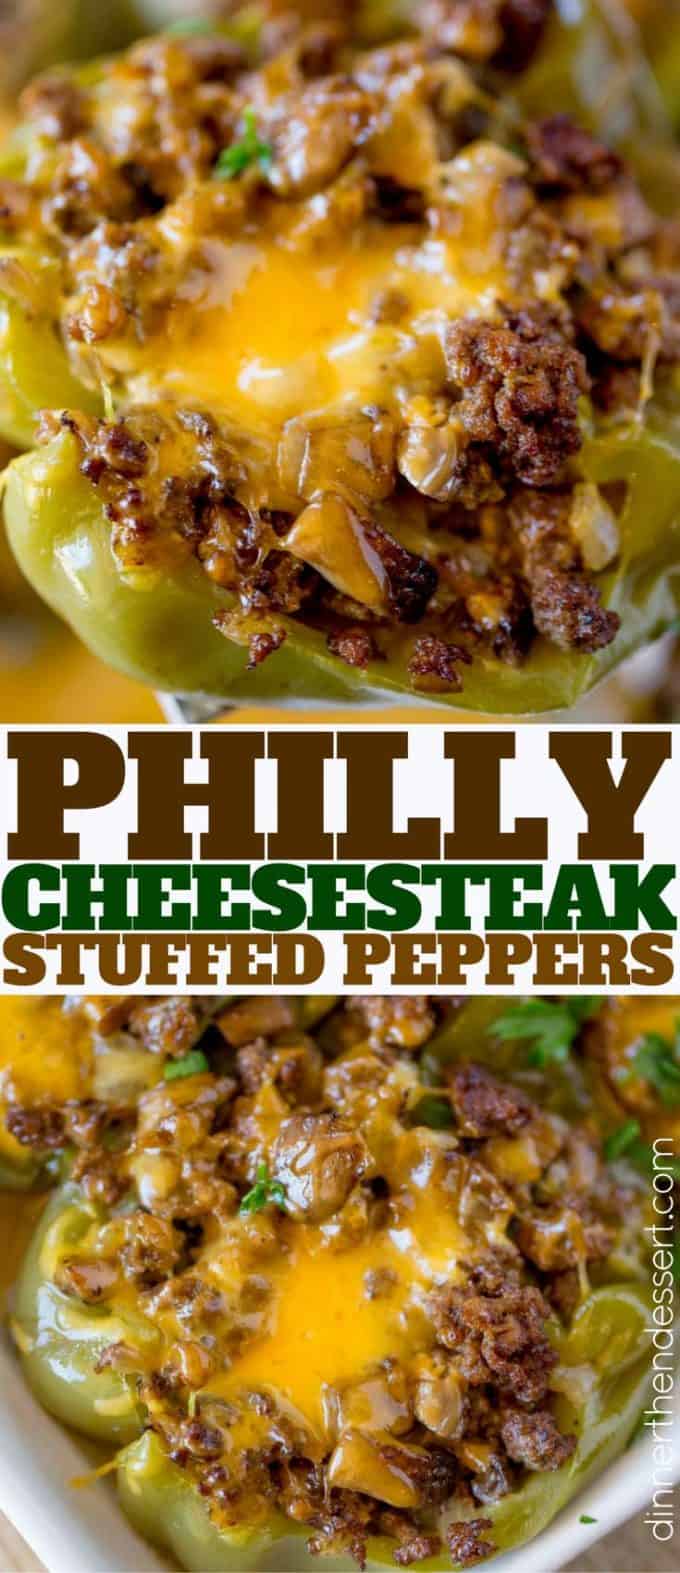 Philly Cheesesteak Stuffed Peppers with all the flavors of your favorite sub sandwich without the carbs and all the cheese, mushrooms, peppers and beef.